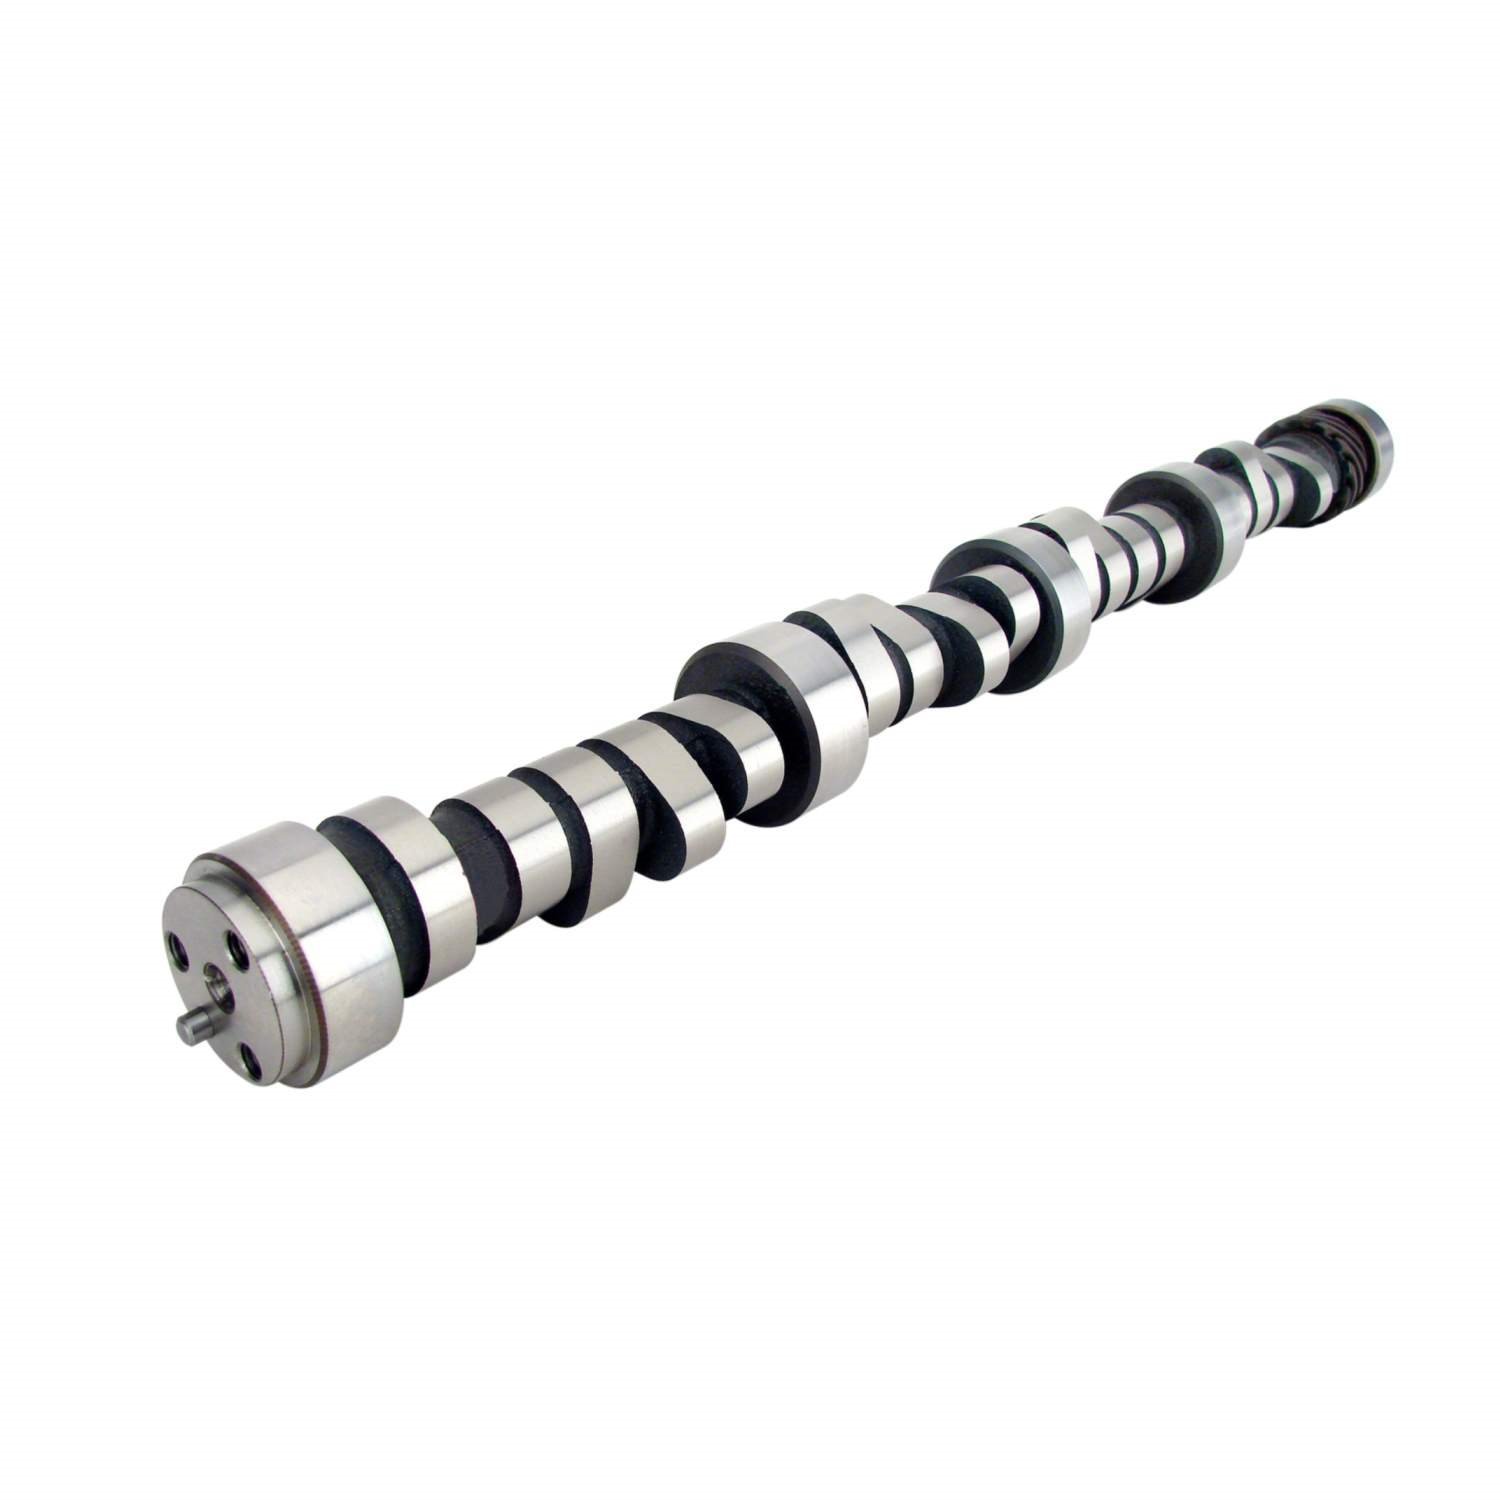 Computer Controlled Hydraulic Roller Tappet Camshaft RPM Range: 1200-5200